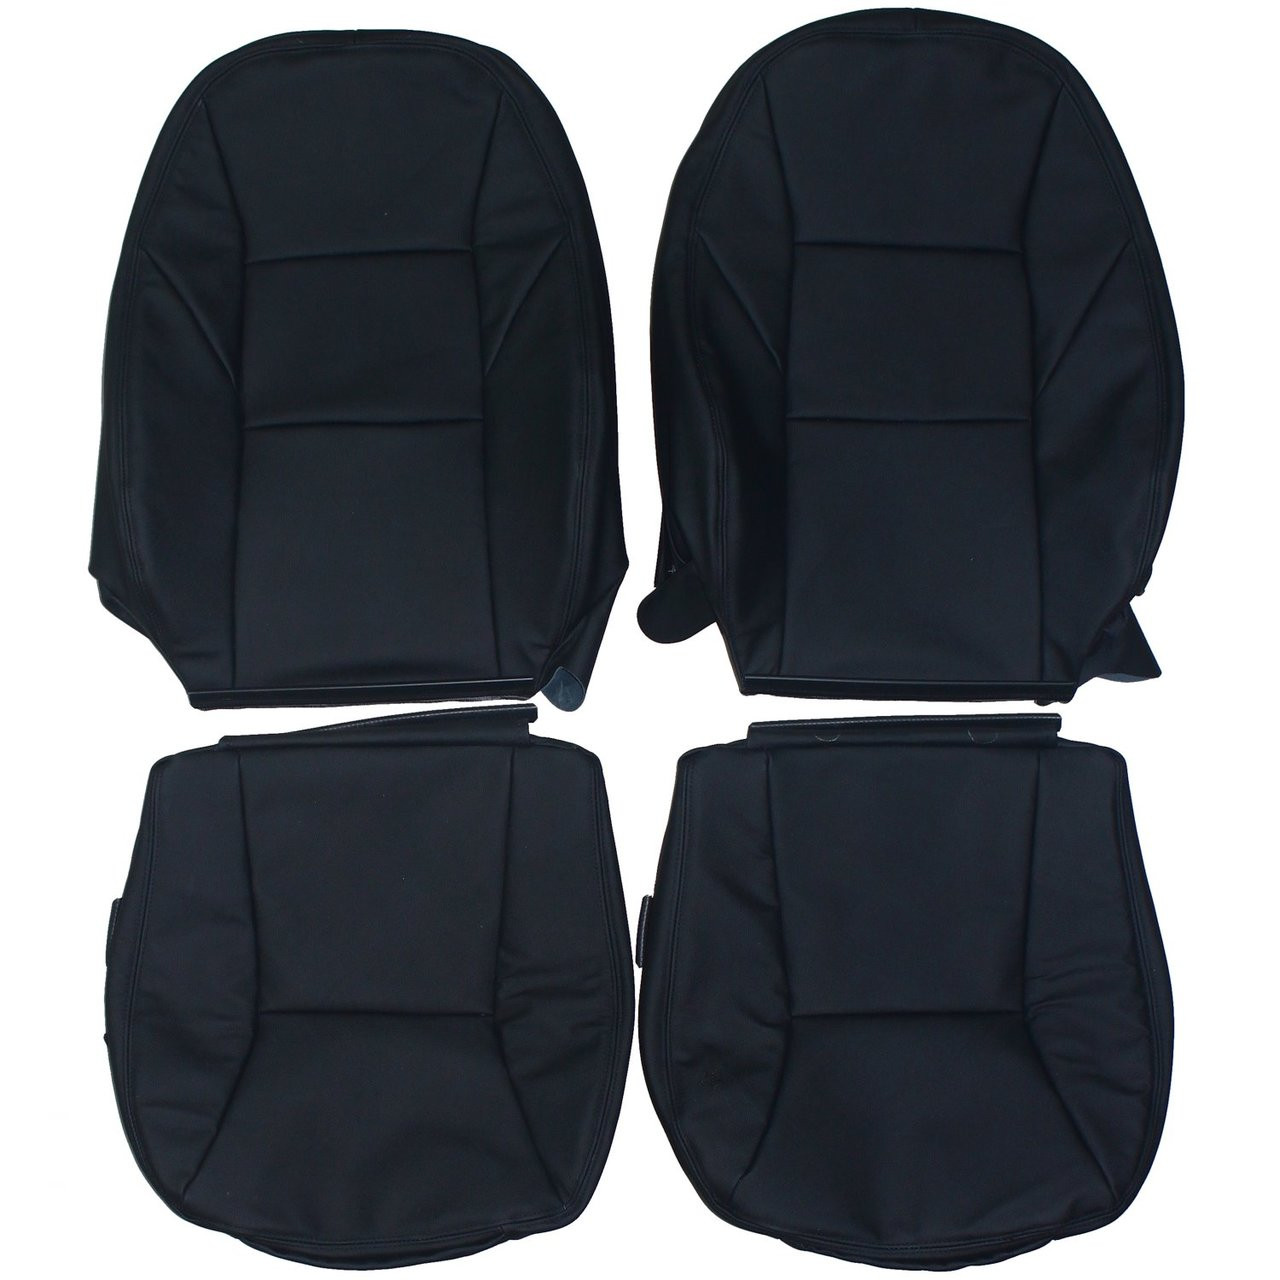 2002-2003 Saab 9-3 SE Convertible Custom Real Leather Seat Covers (Front) -  Lseat.com